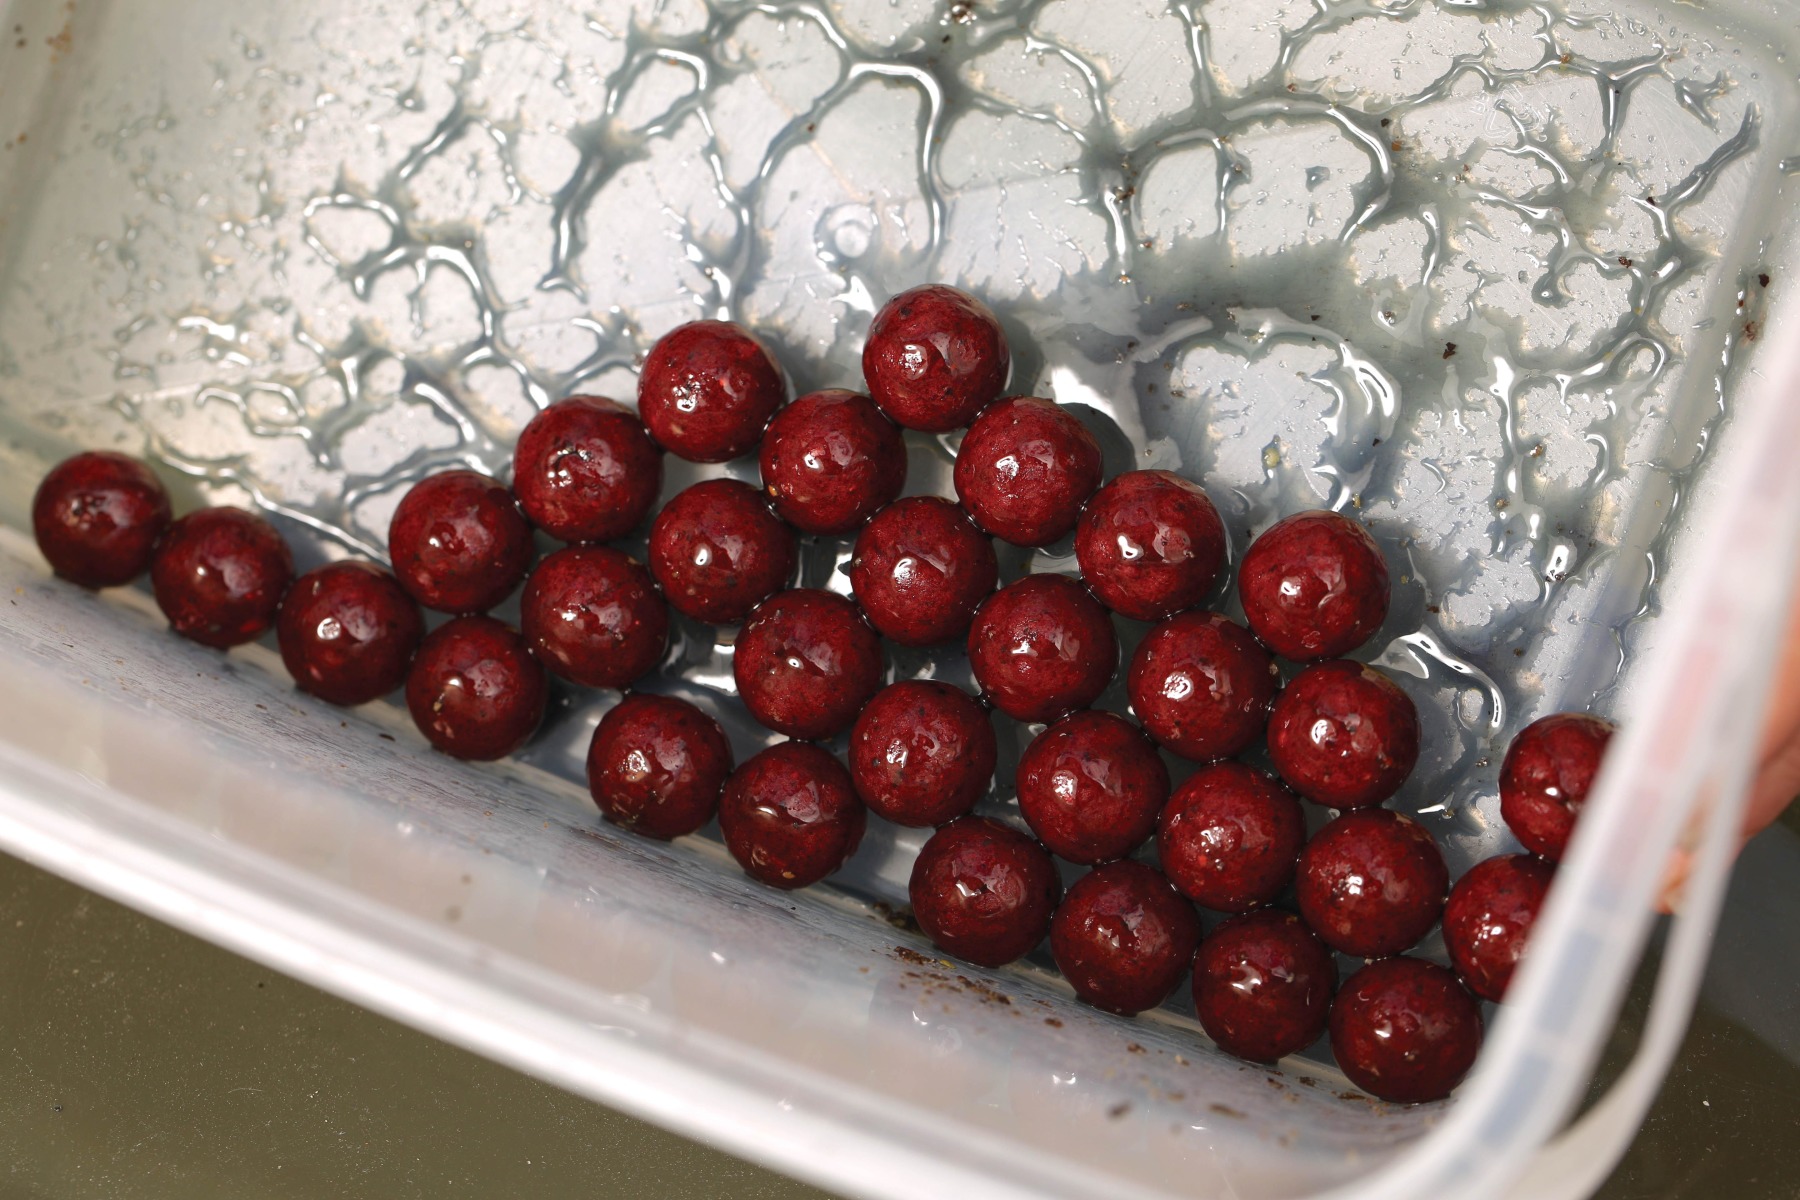 4. Roll the hookbaits around in the tub to give them all an even coating of liquid.